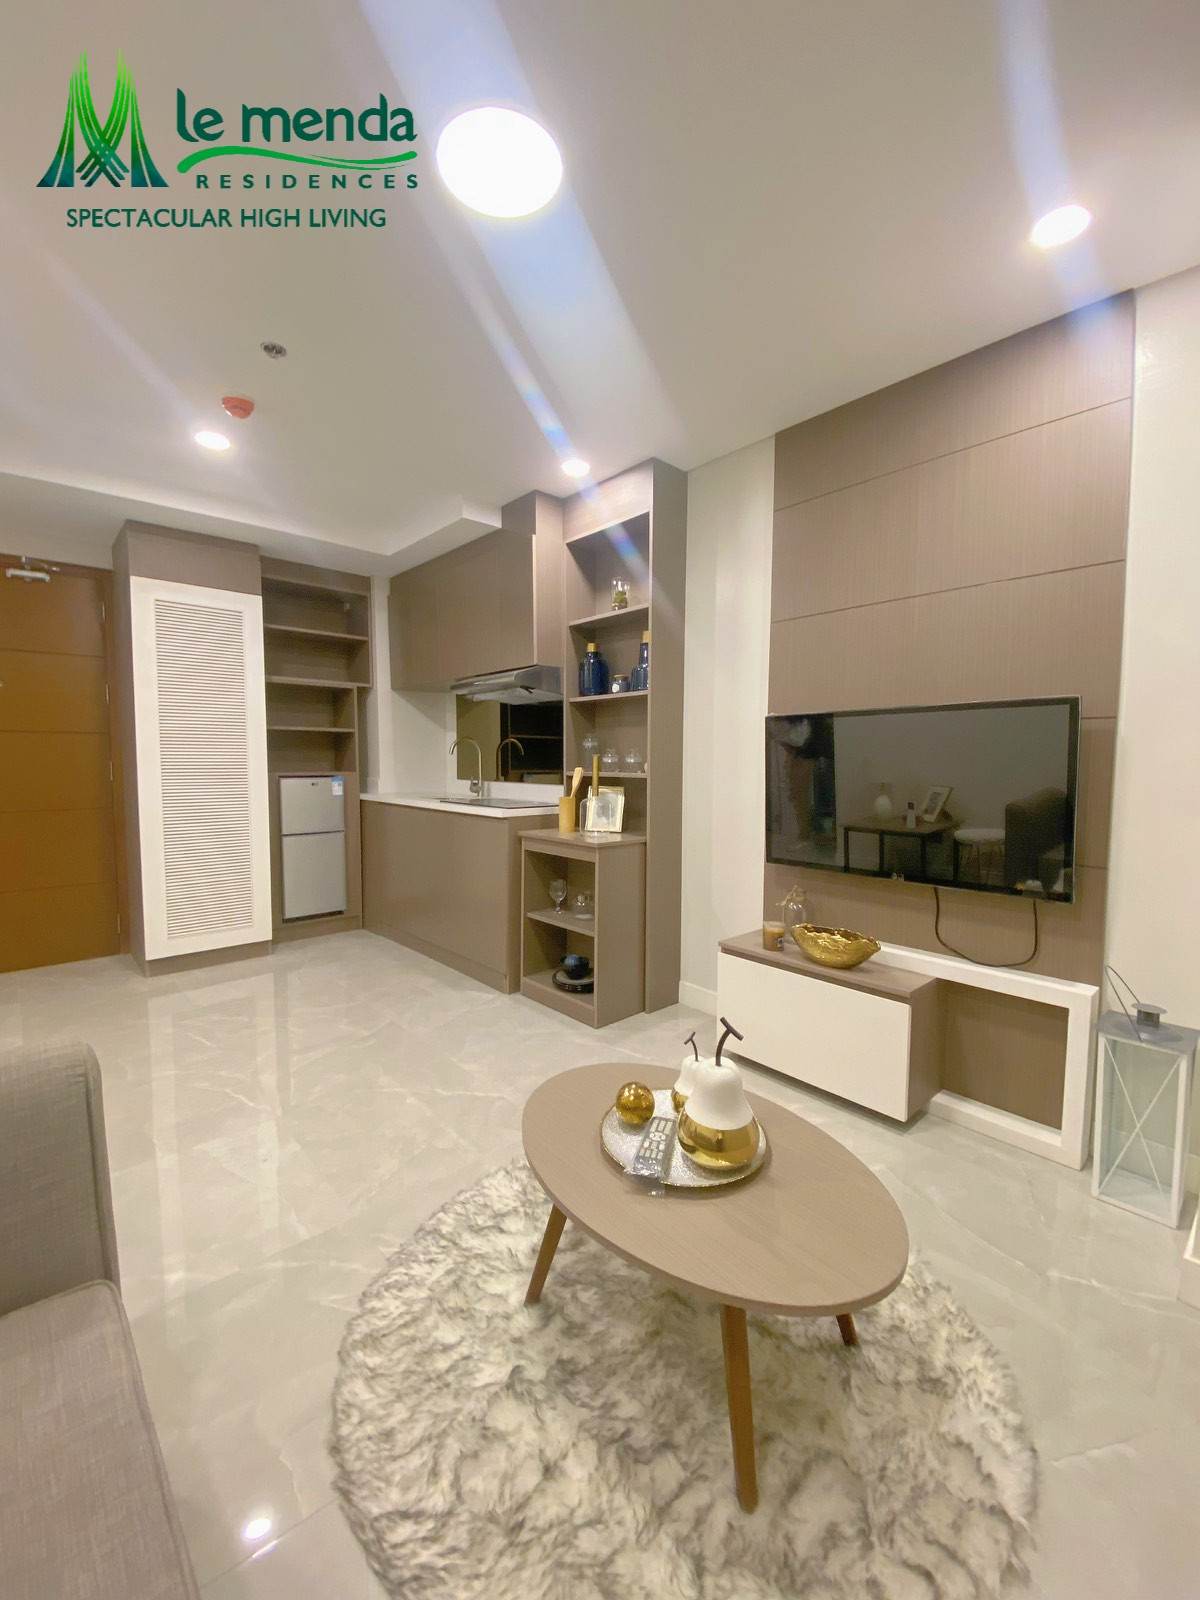 le menda residences, rent to own fully furnished condo in cebu